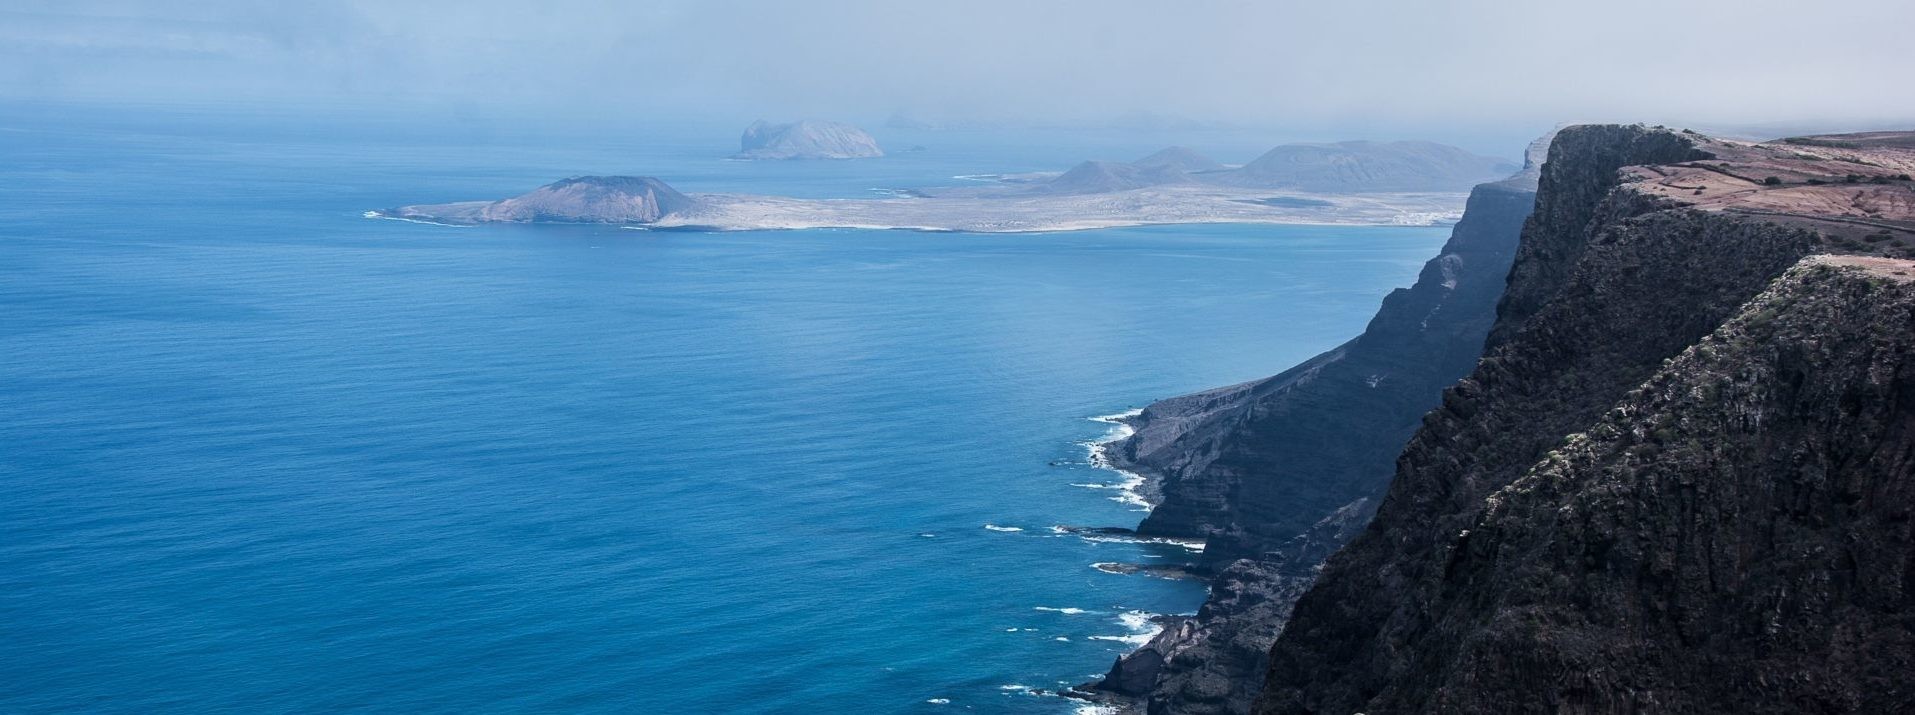 Sailing in the Canary Islands: Tenerife and Lanzarote